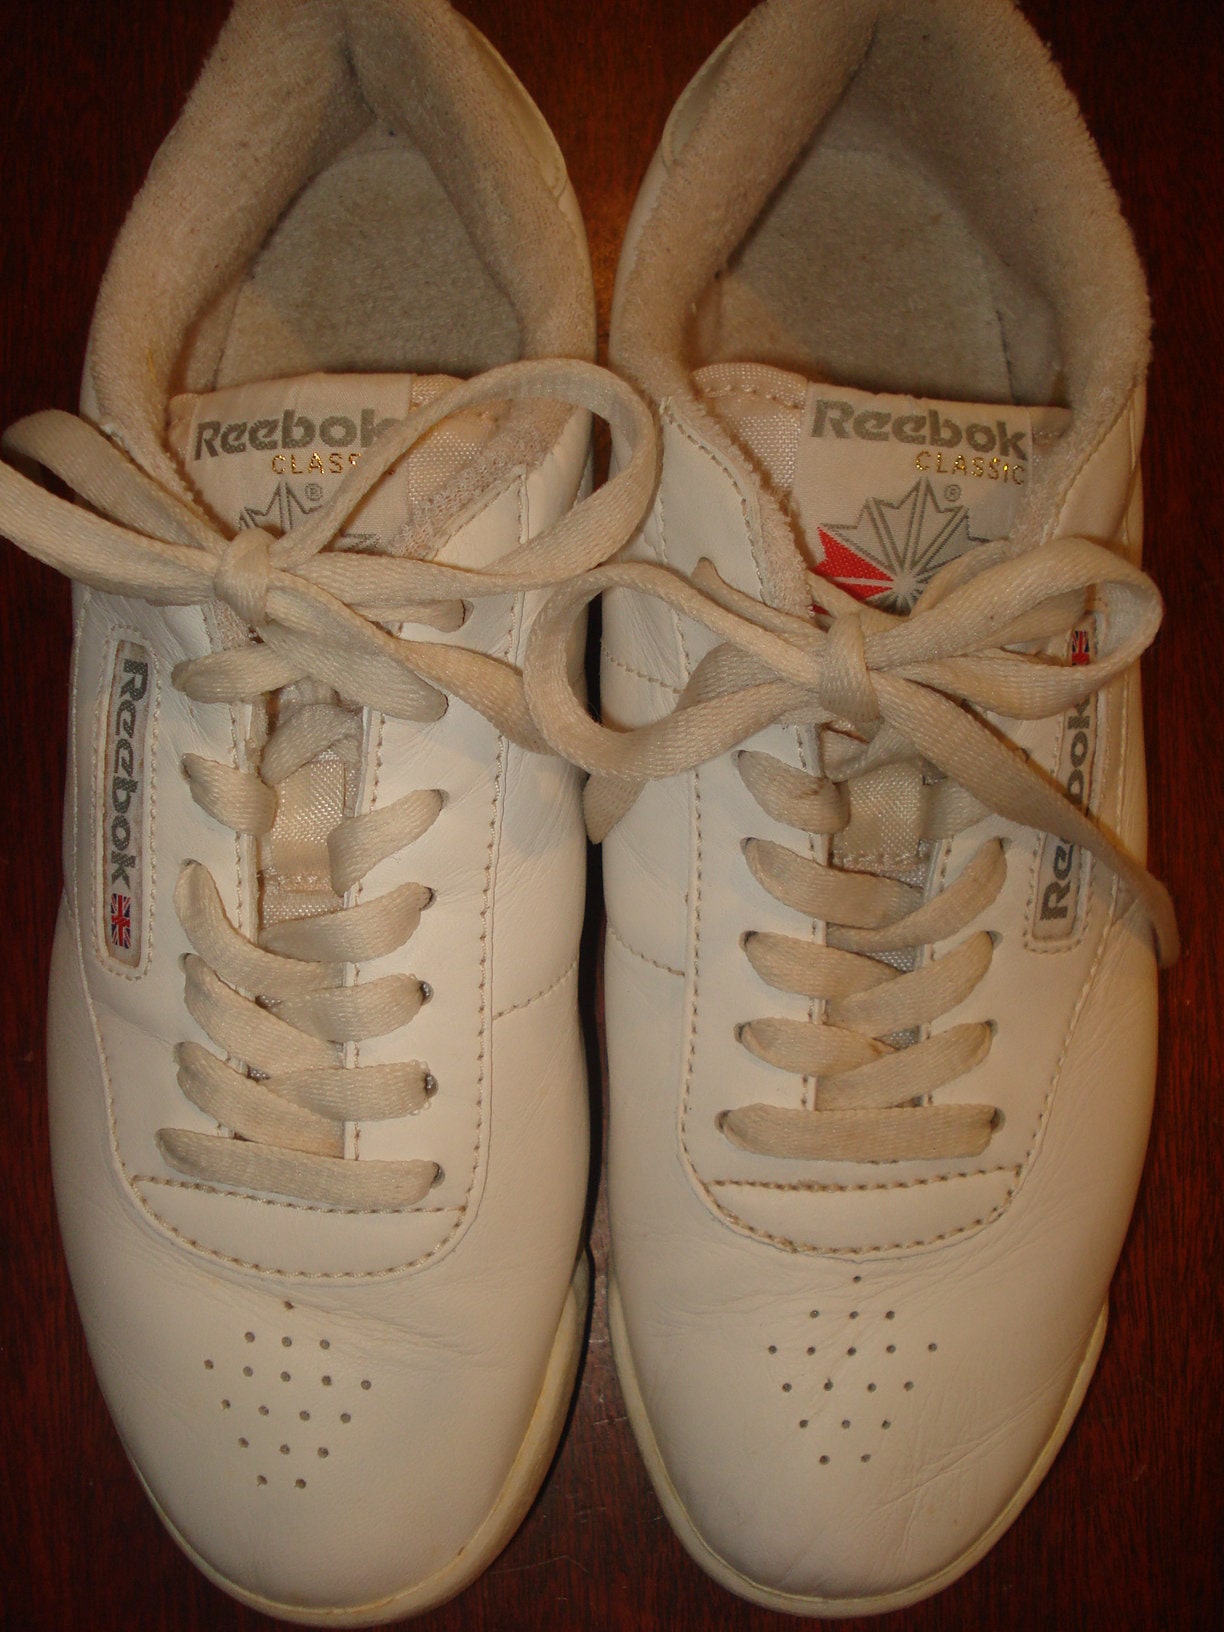 Reebok Classic Princess White Leather Aerobic Shoes Sneakers Size 8